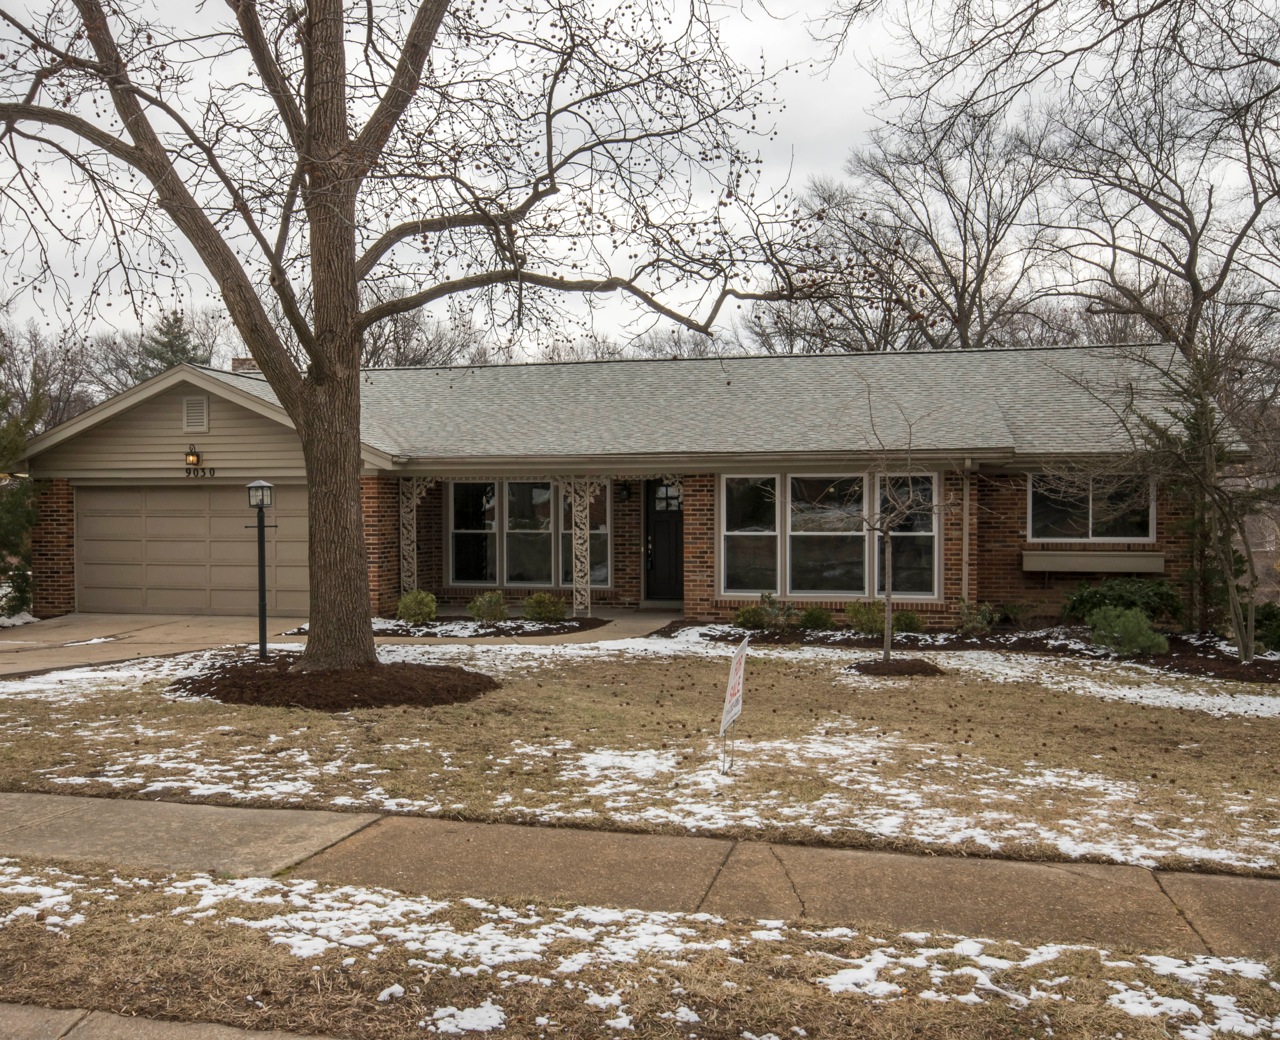 Single level family home in Crestwood St. Louis